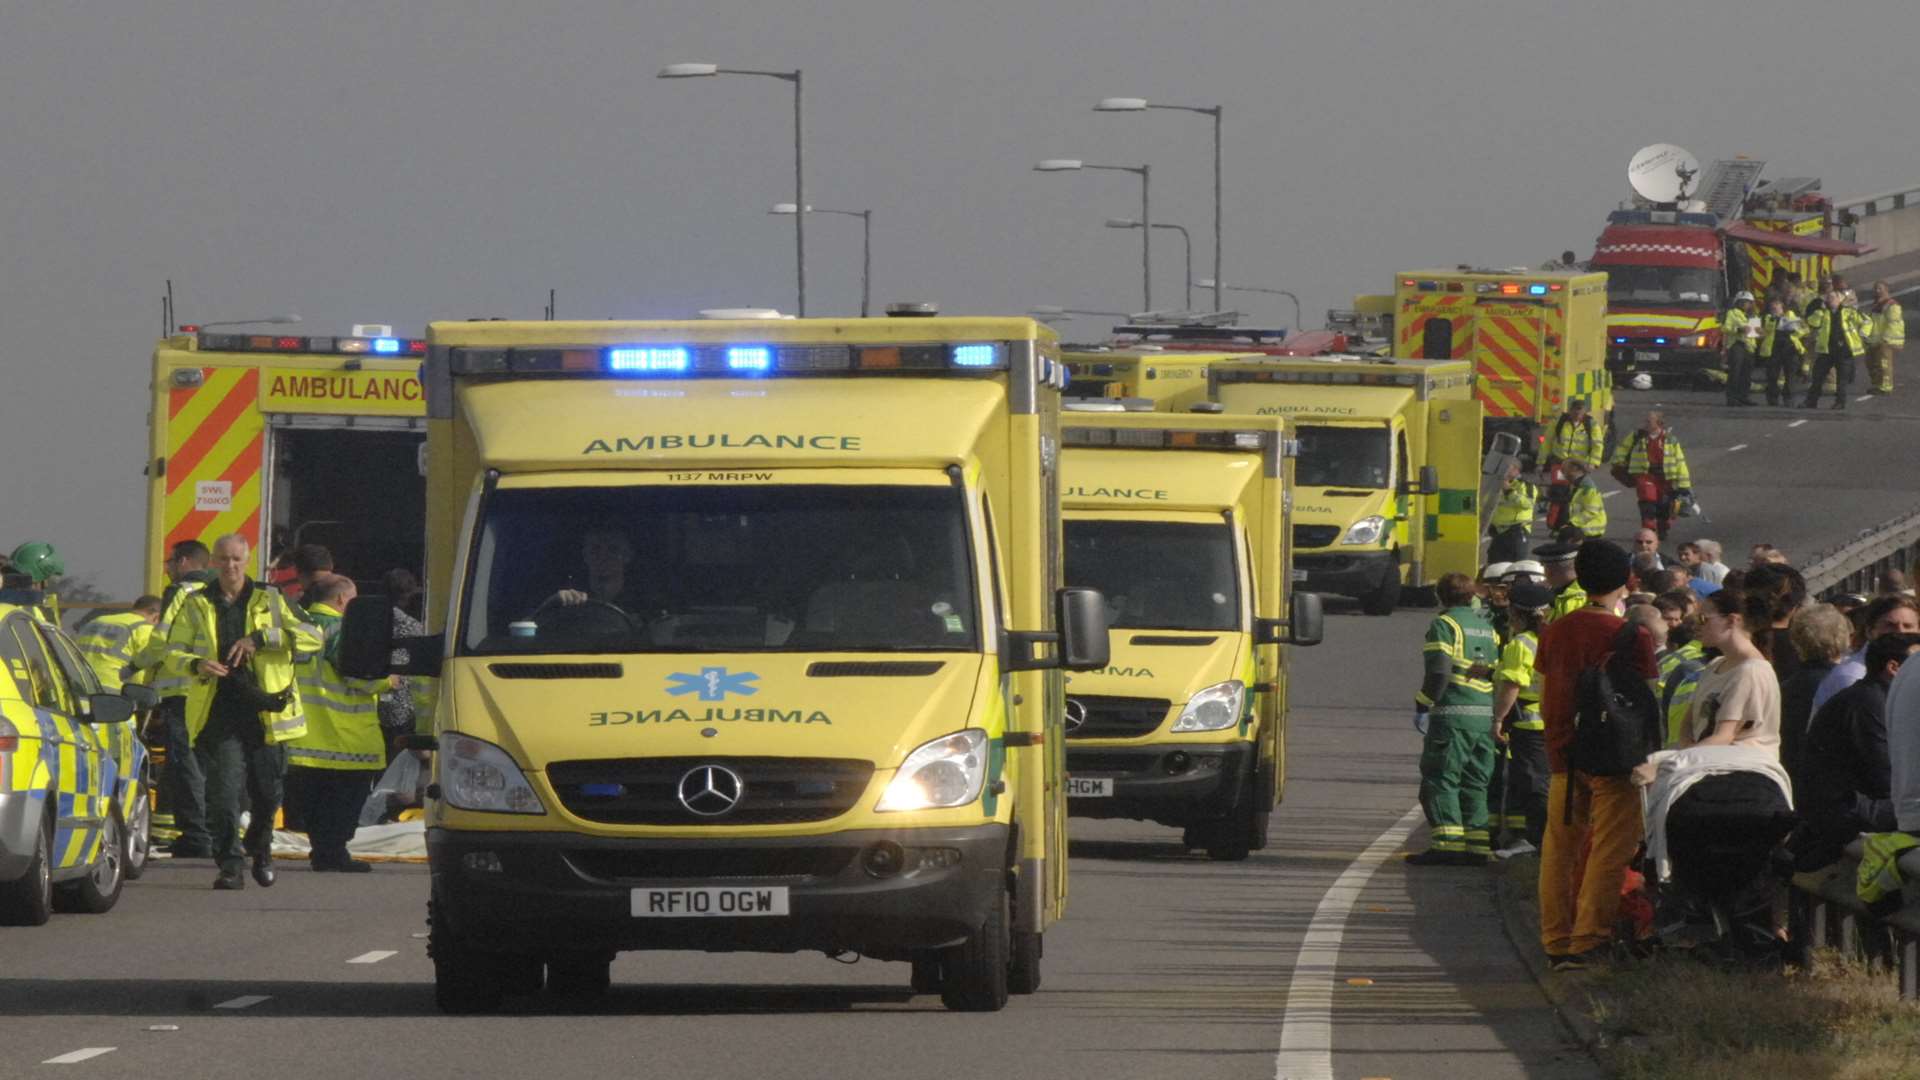 Ambulances leave the scene following the Sheppey Crossing crash. Picture: Chris Davey